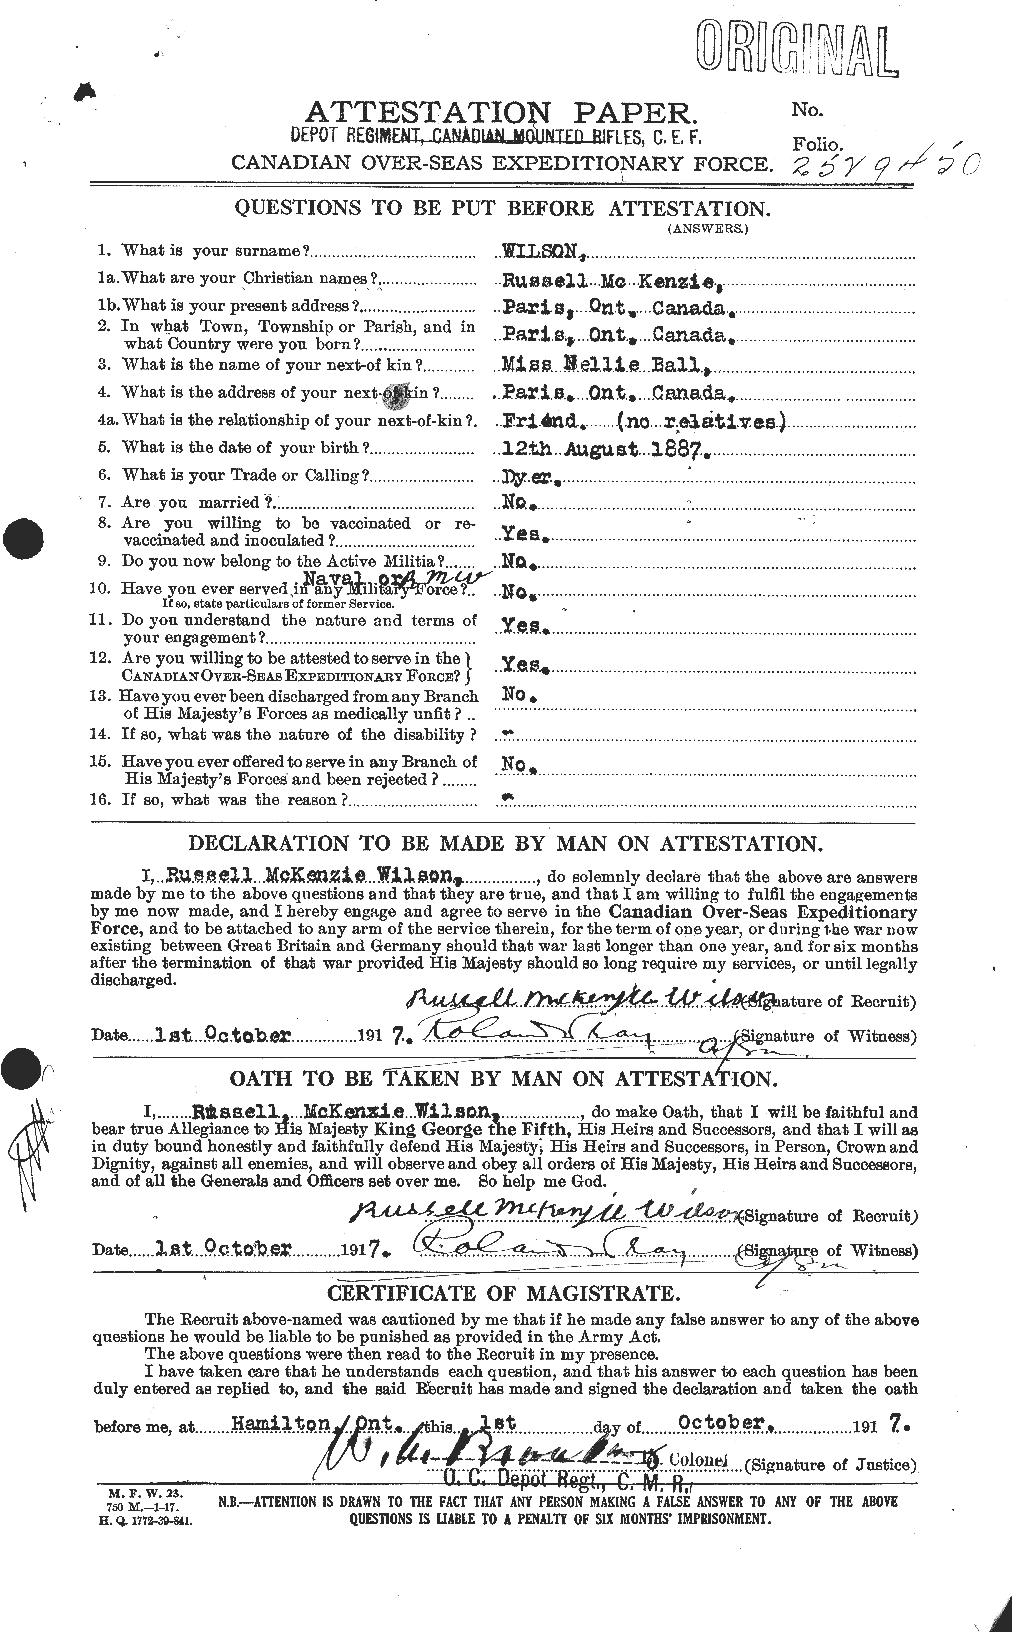 Personnel Records of the First World War - CEF 681083a